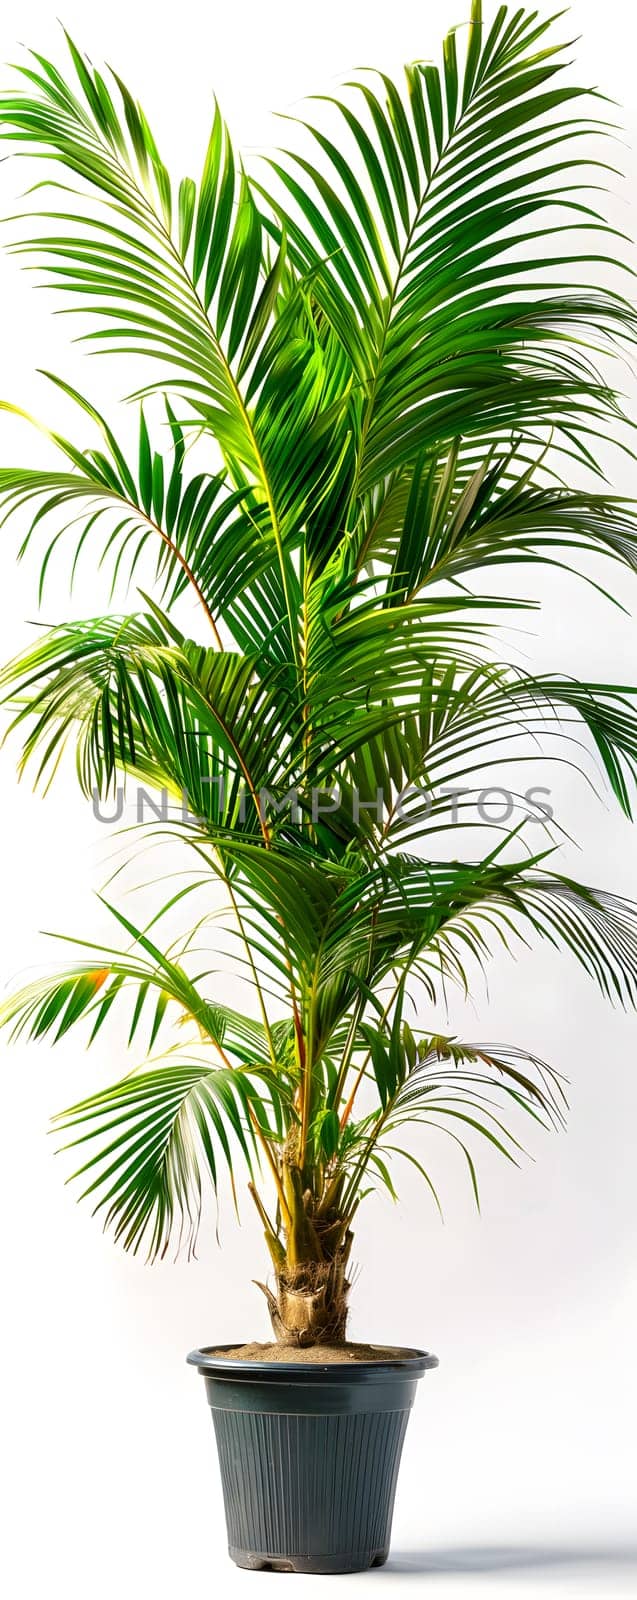 Palm tree in a pot on white background, perfect for events or landscapes by Nadtochiy